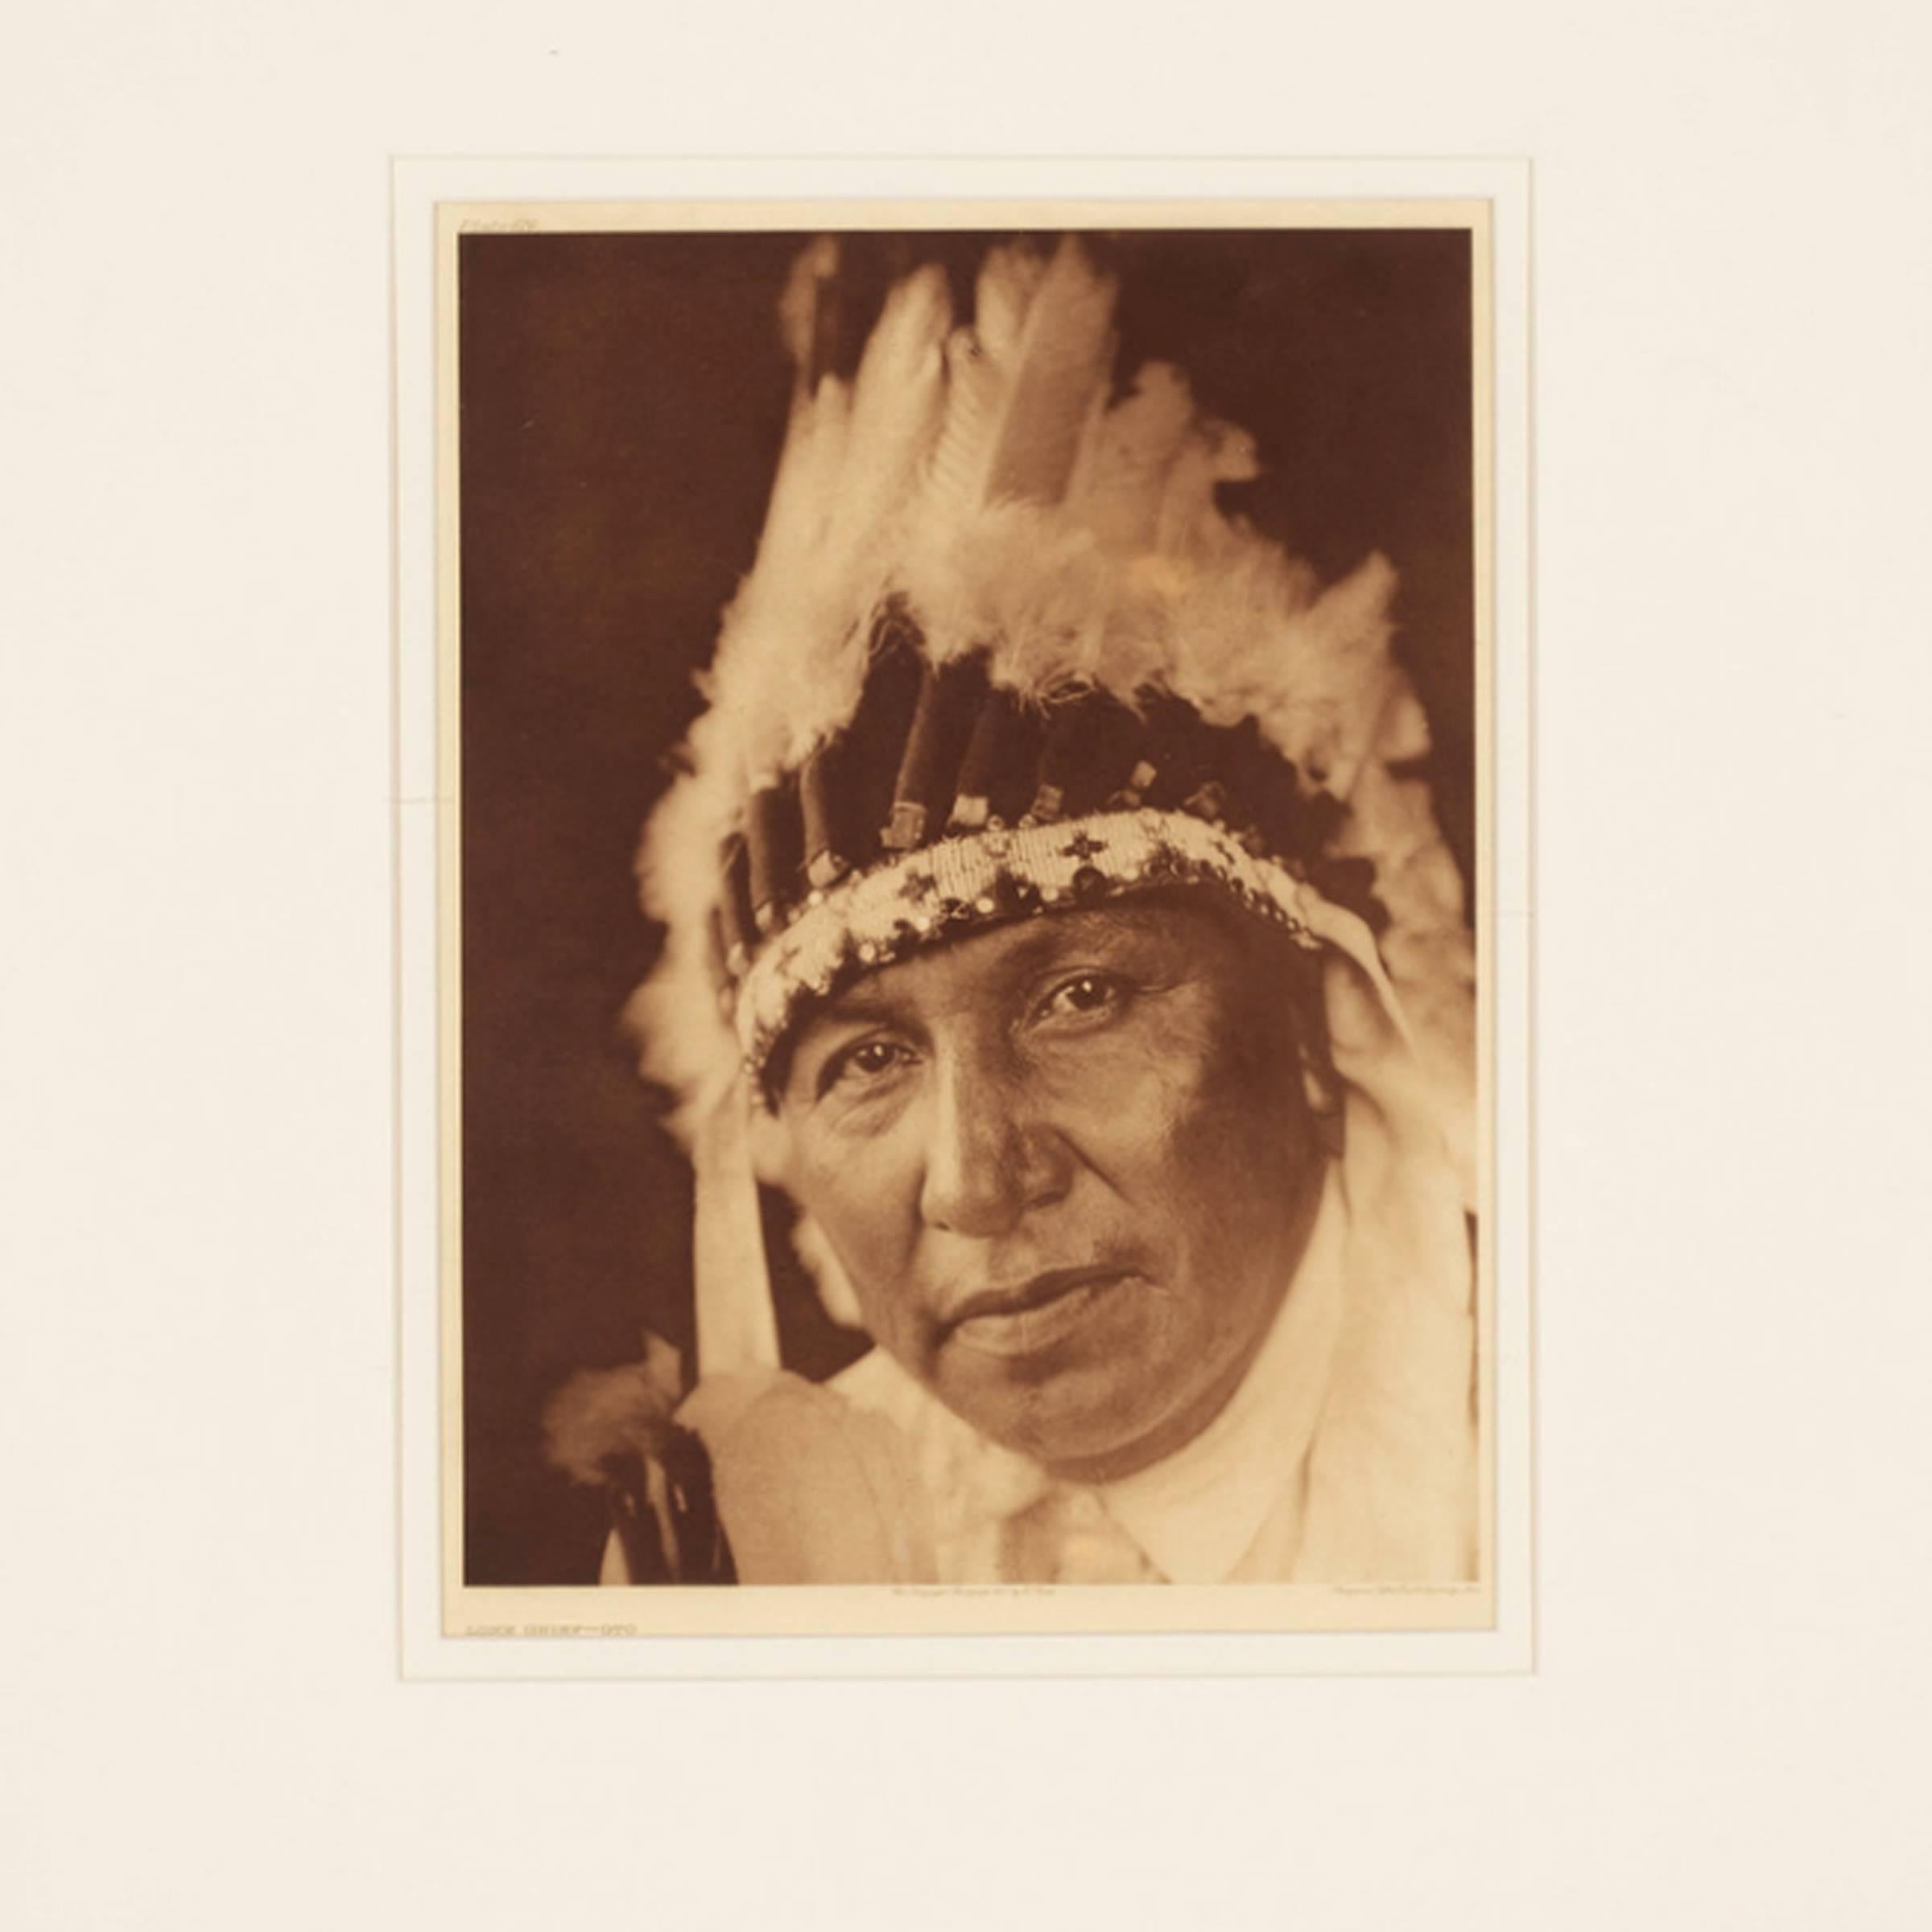 Framed photograph of Lone Chief Oto by Edward S. Curtis, 1868-1952. This photograph is plate number 676 from volume 19 of Curtis' series The North American Indian, 1927.